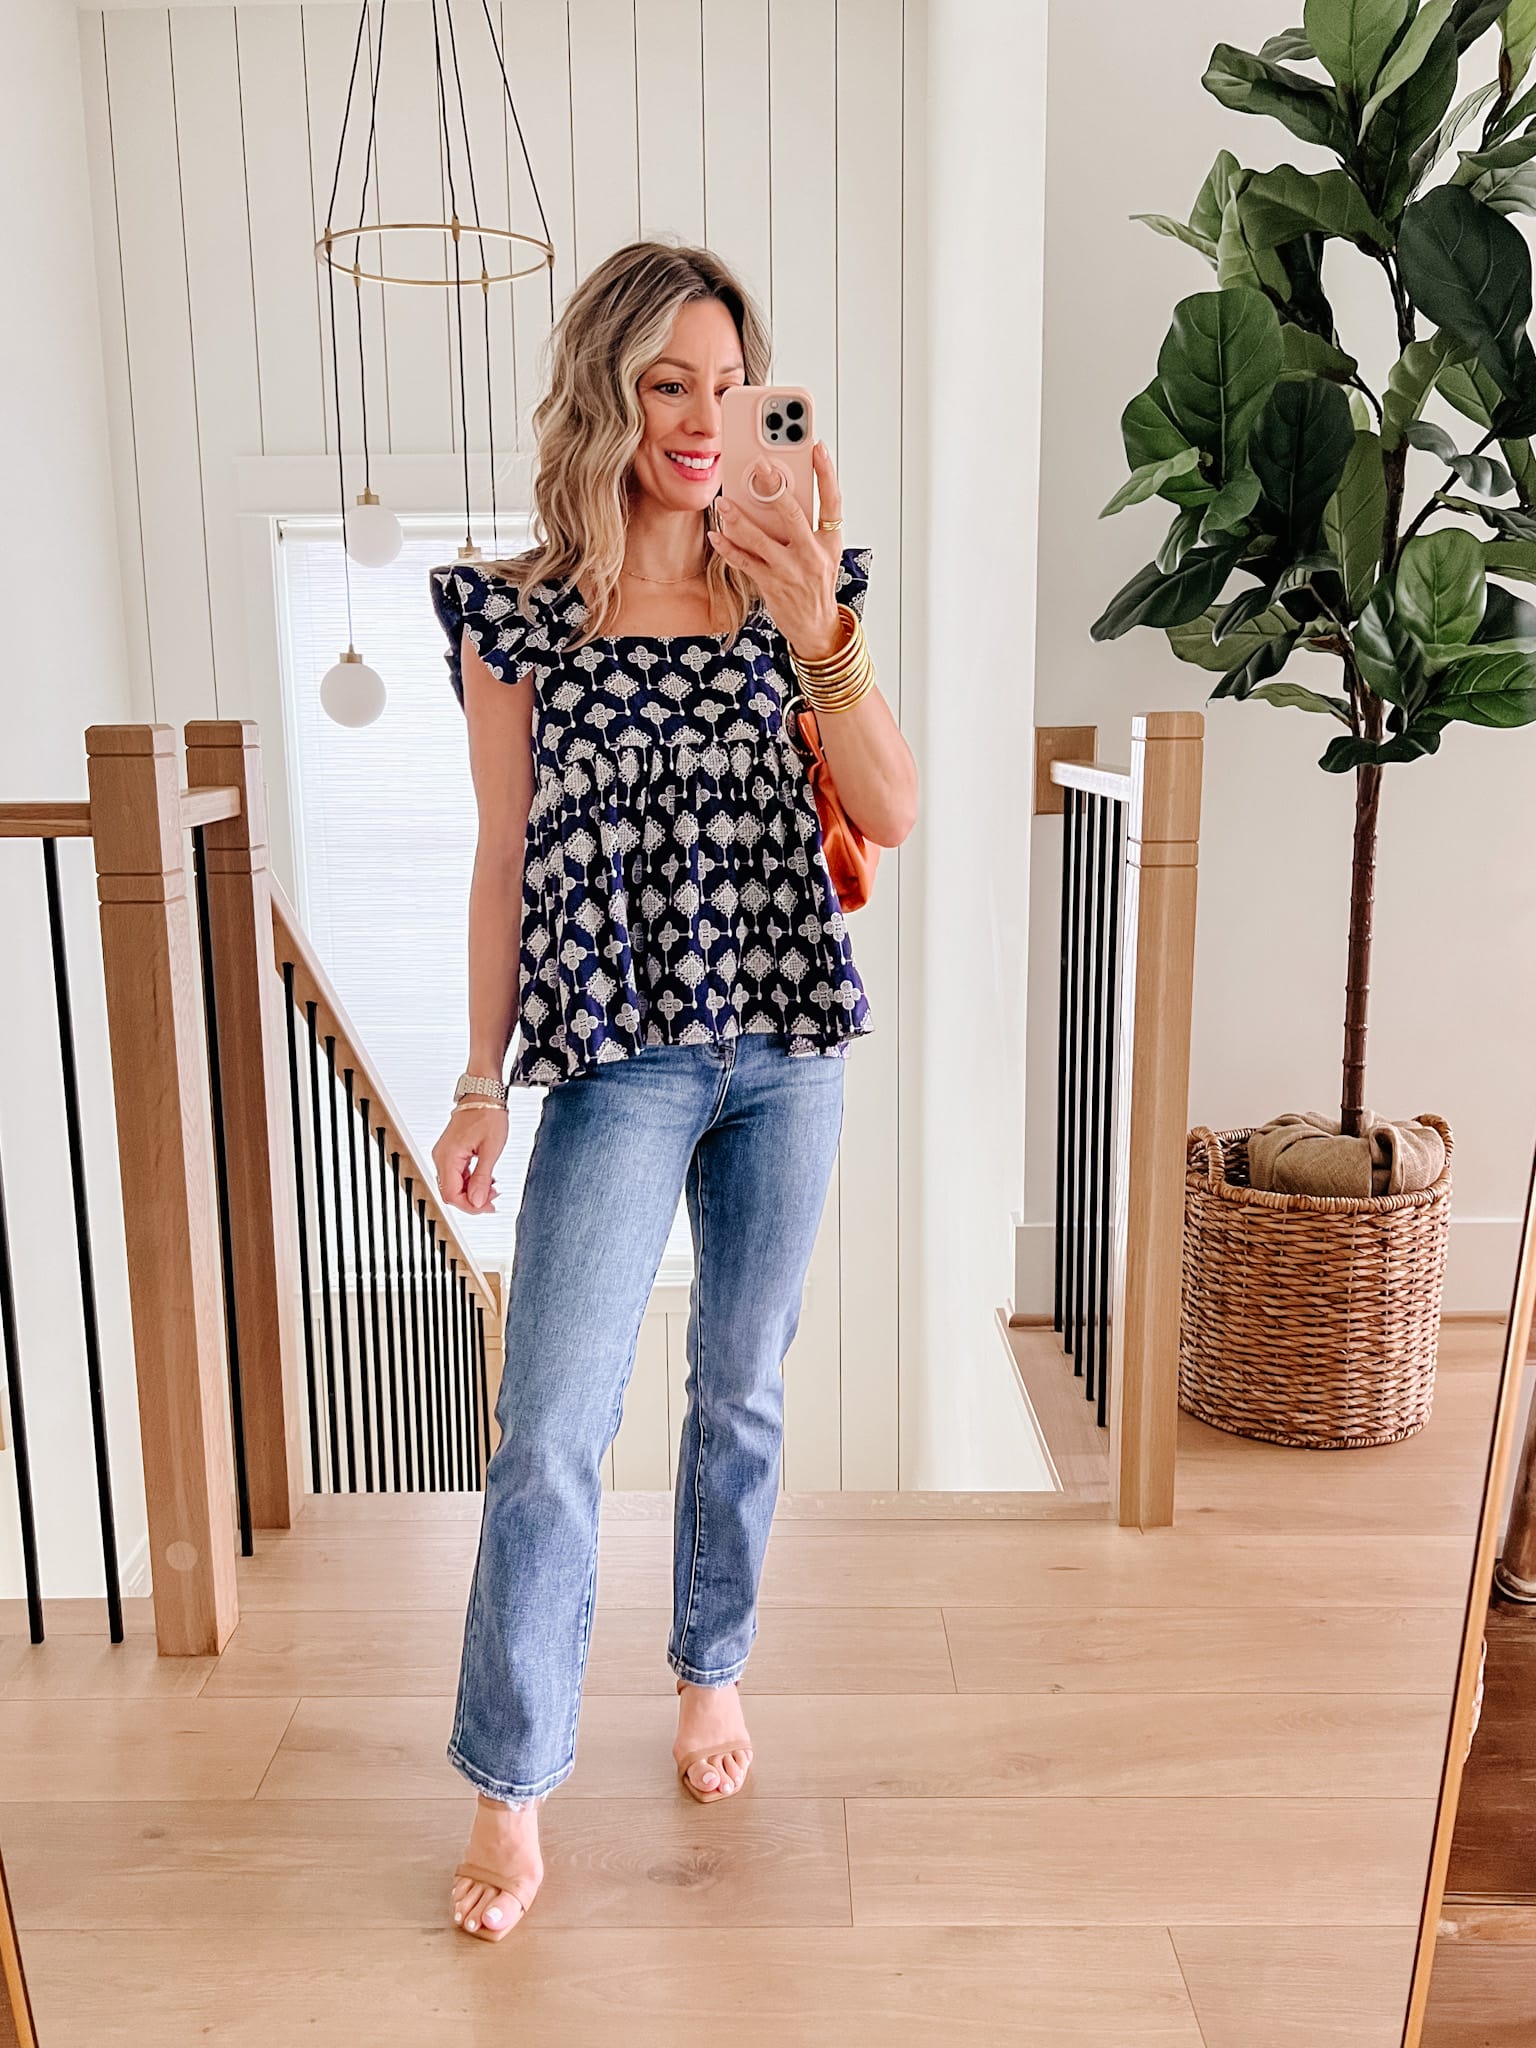 A Go-To Summer Uniform: High Rise Denim and Crop Tops - Sea of Shoes